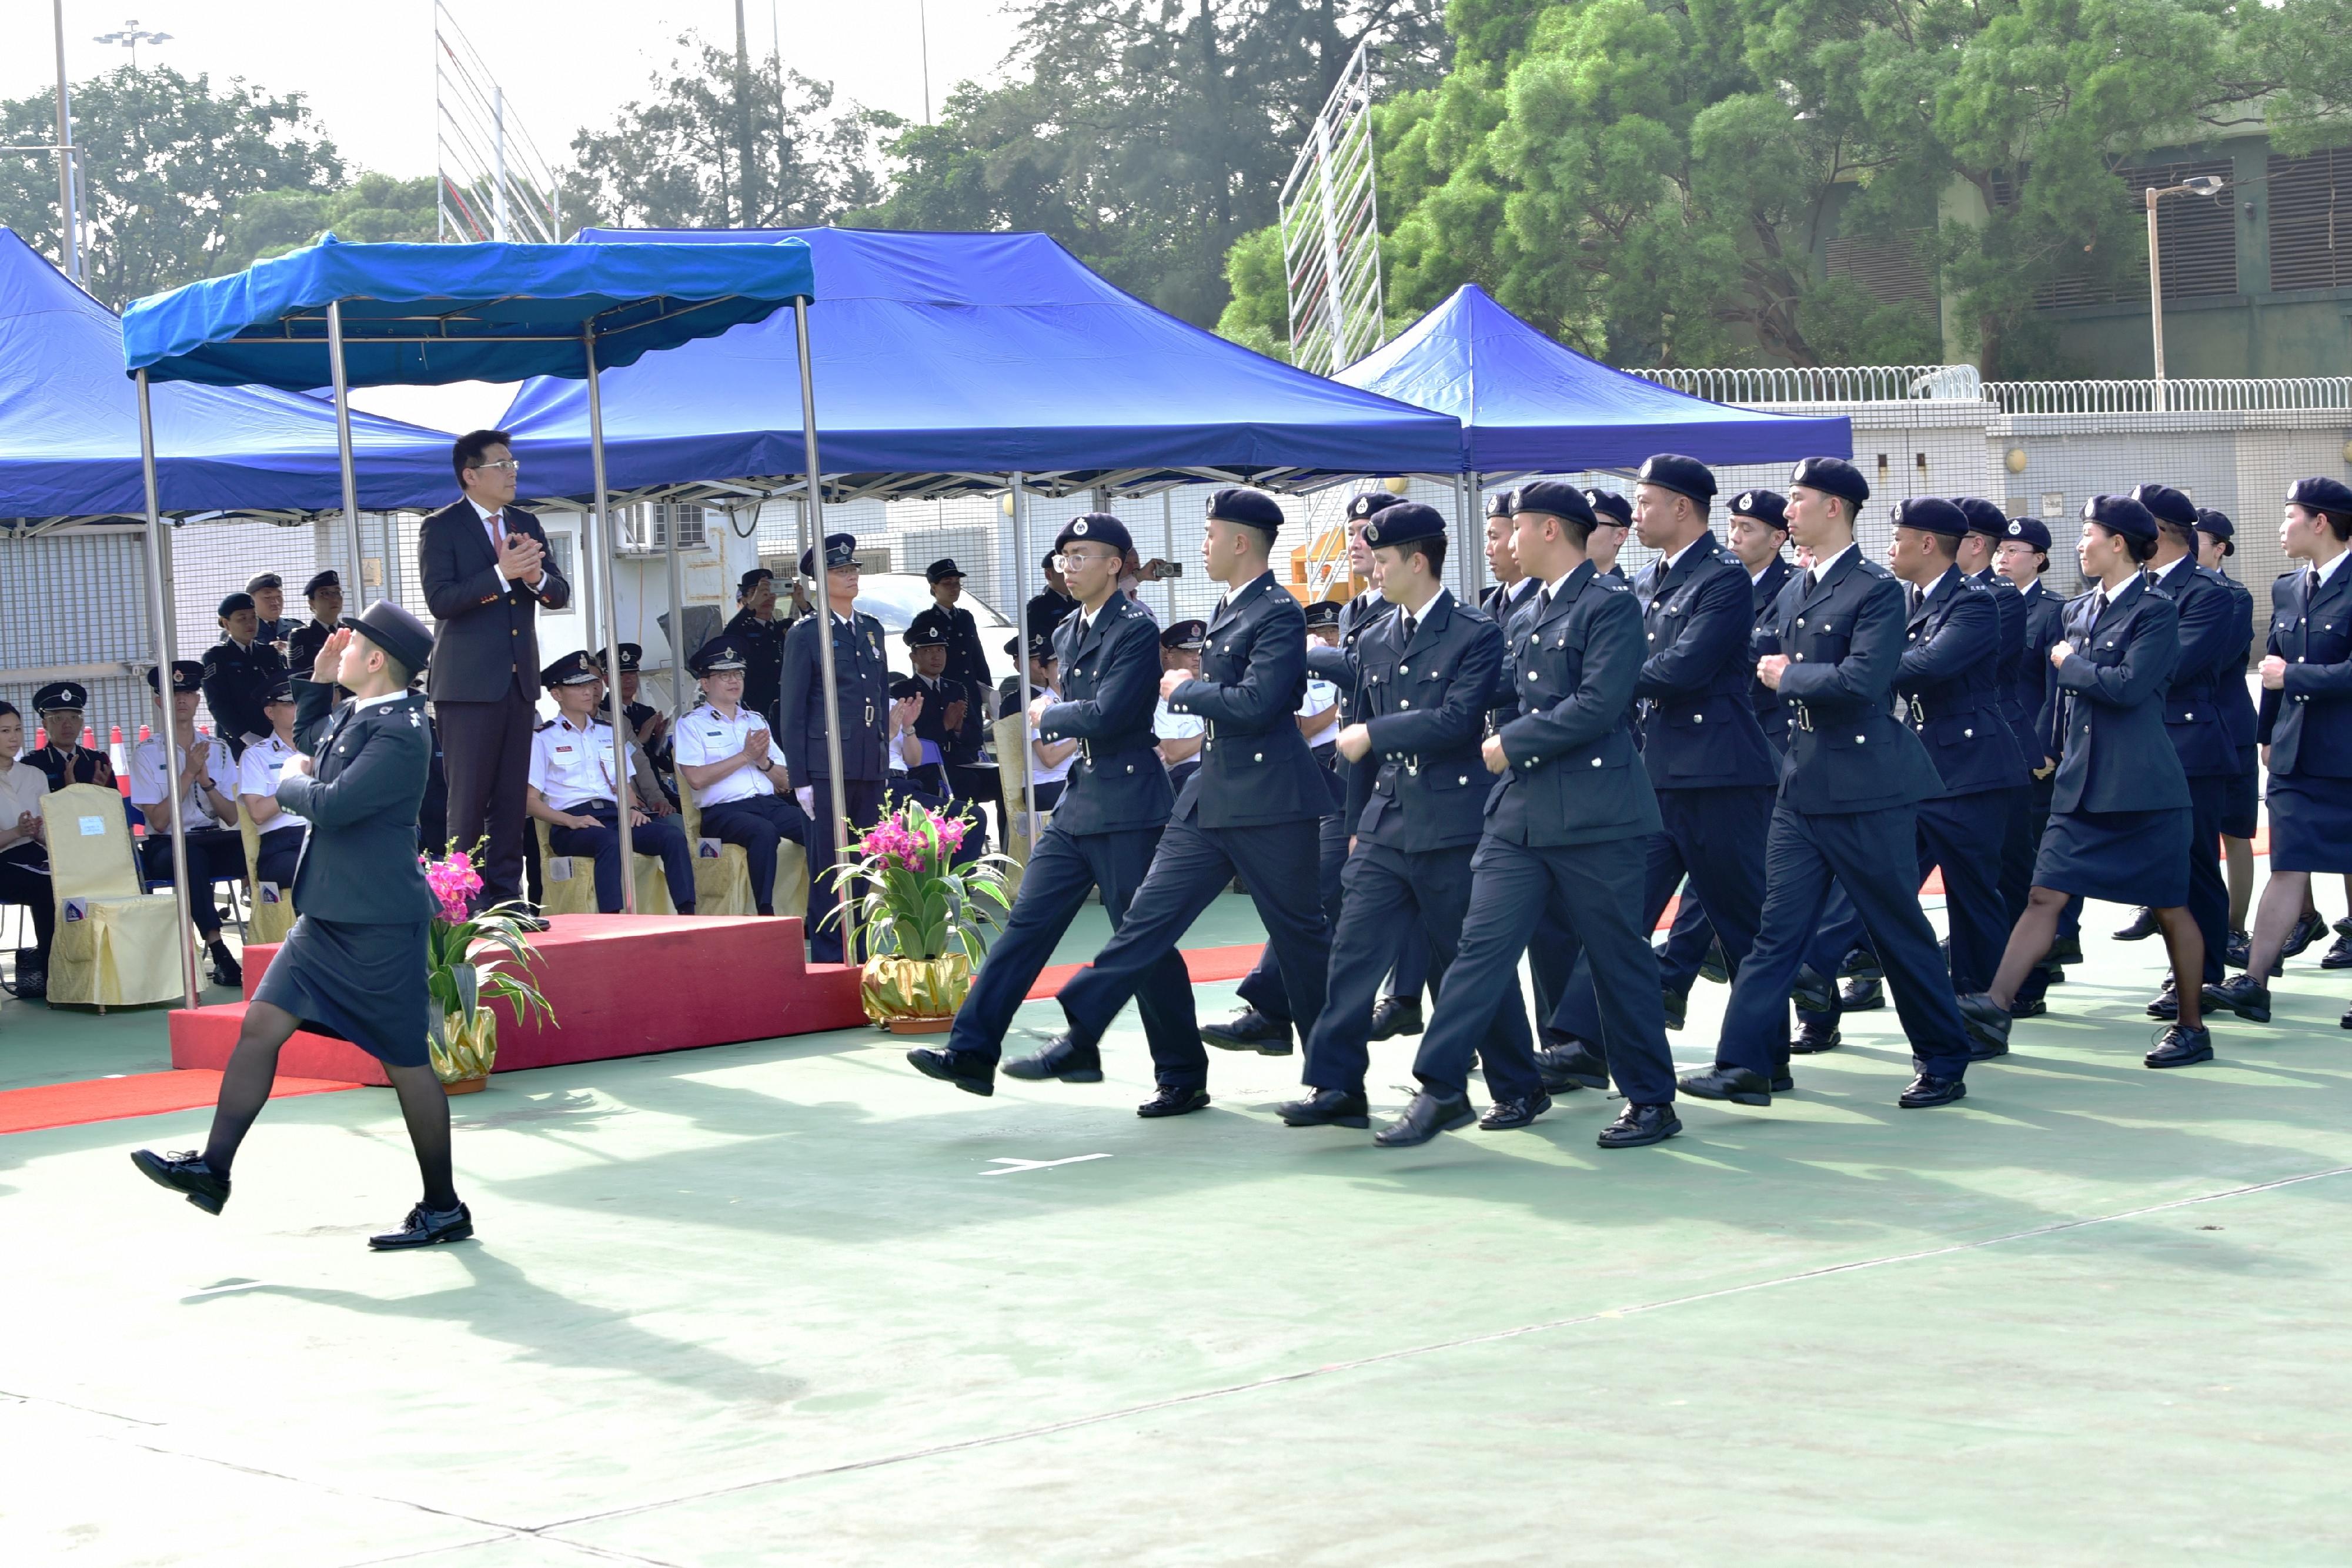 The Civil Aid Service held the 86th Recruits Passing-out Parade at its headquarters today (October 15). Photo shows the parade marching past the review stand.